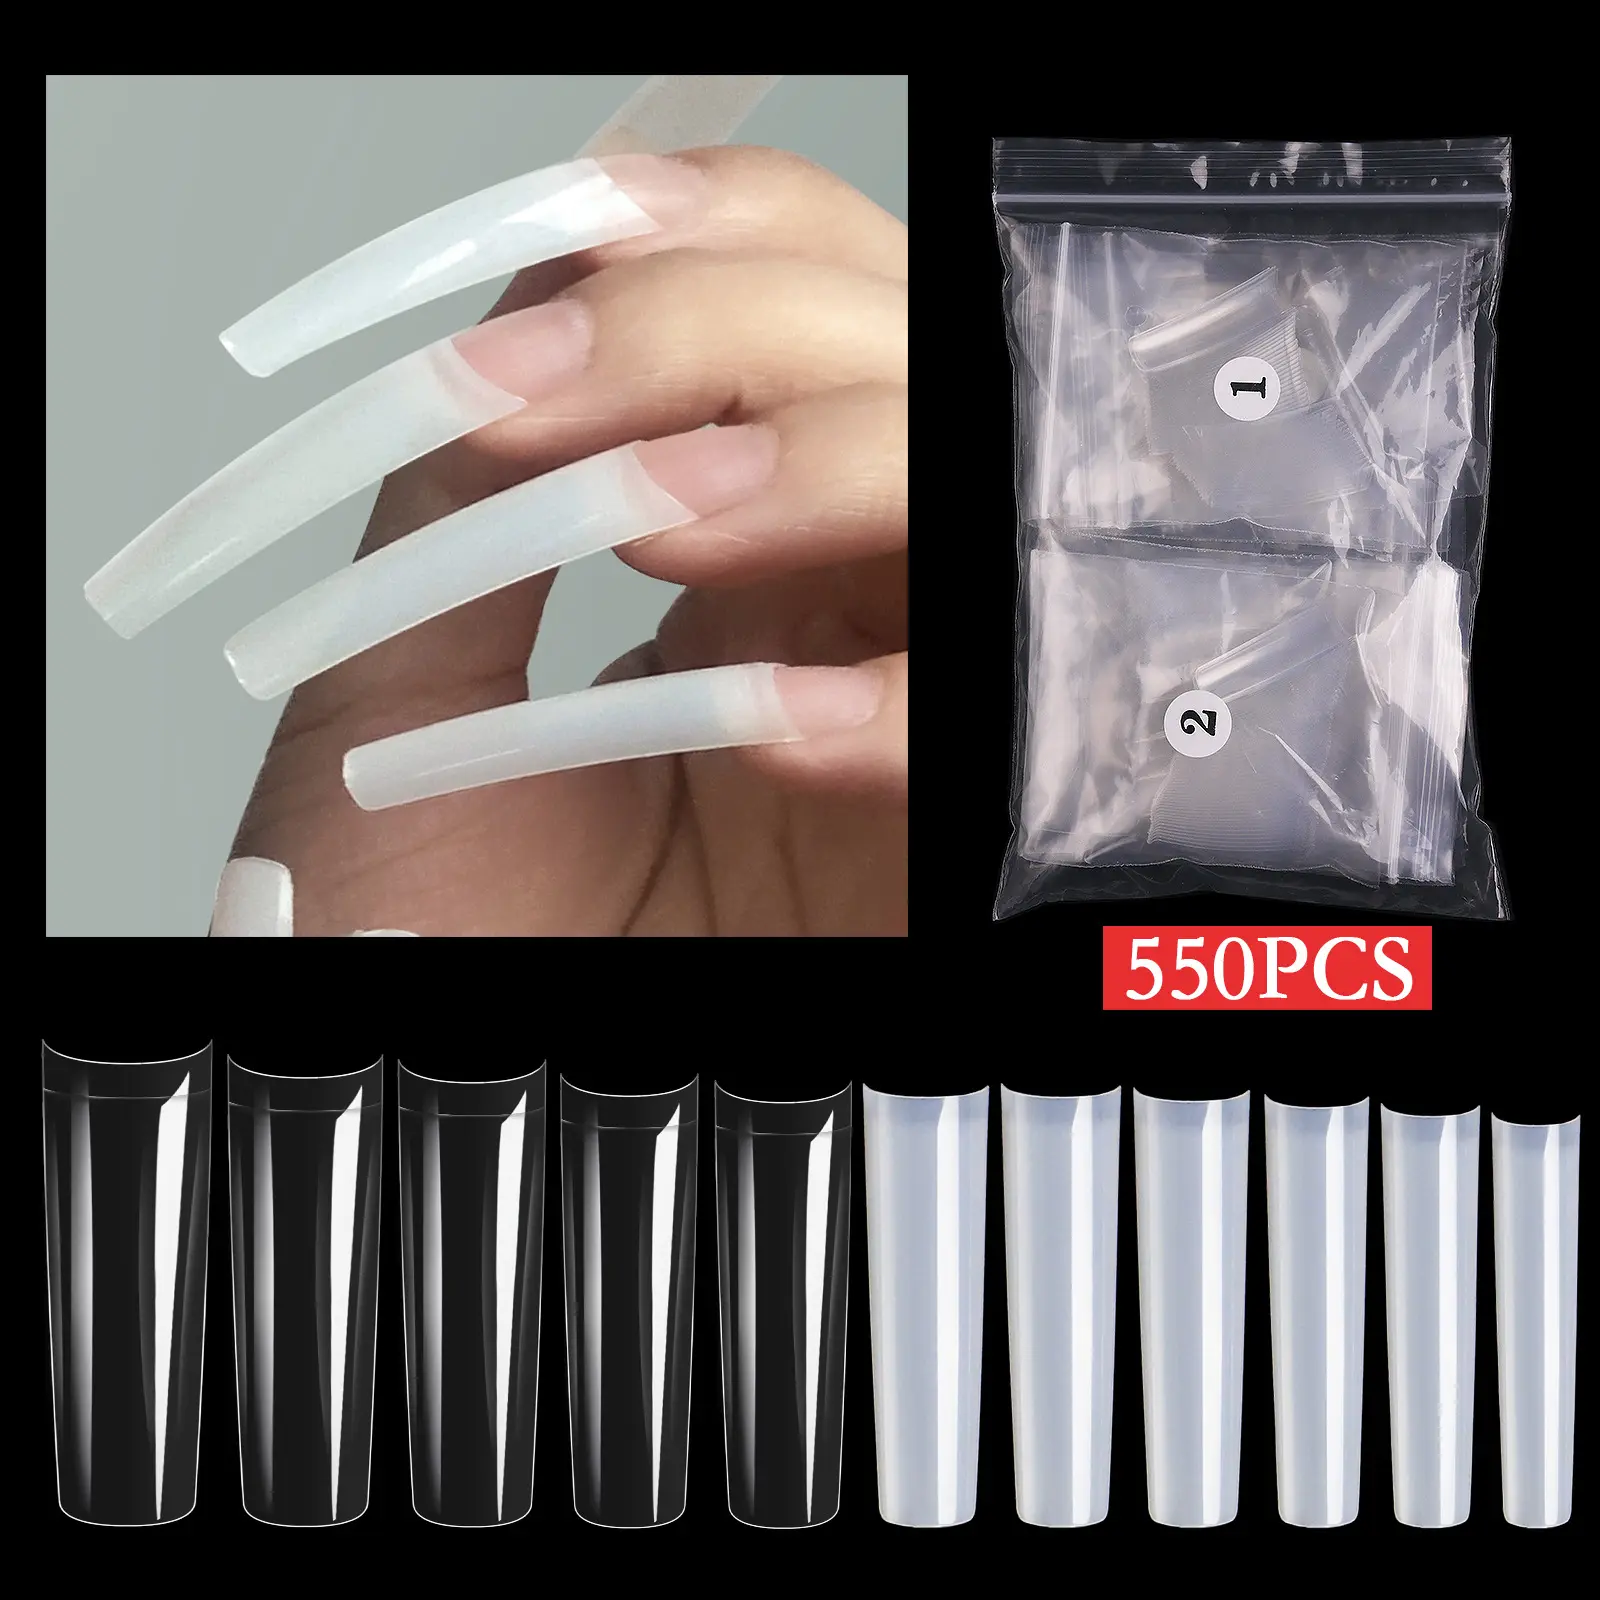 Newest 550pcs xxl coffin nail tips curved square artificial nails long french coffin nail tips